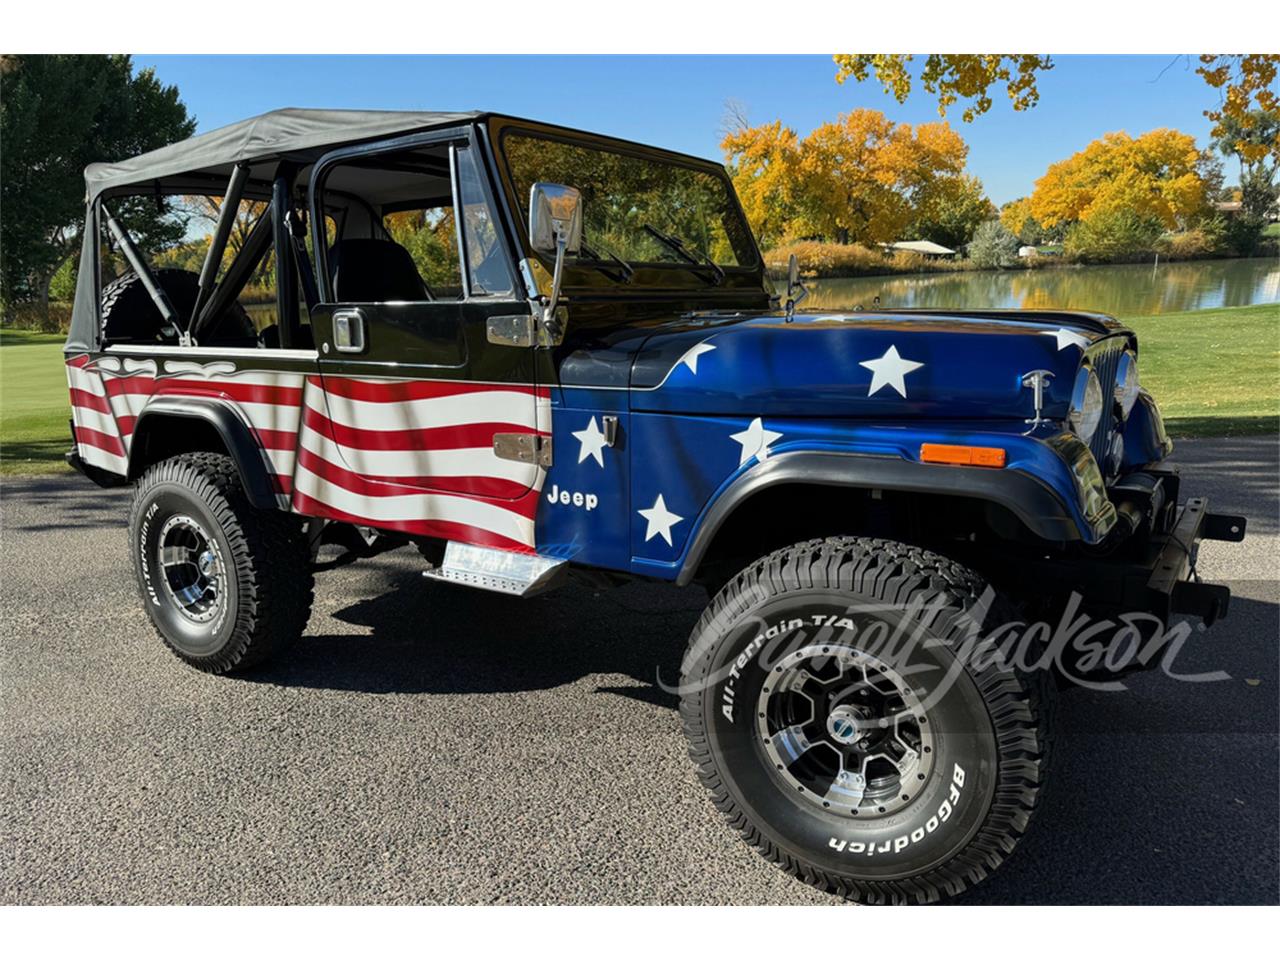 For Sale at Auction: 1984 Jeep CJ8 Scrambler in Scottsdale, Arizona for sale in Scottsdale, AZ